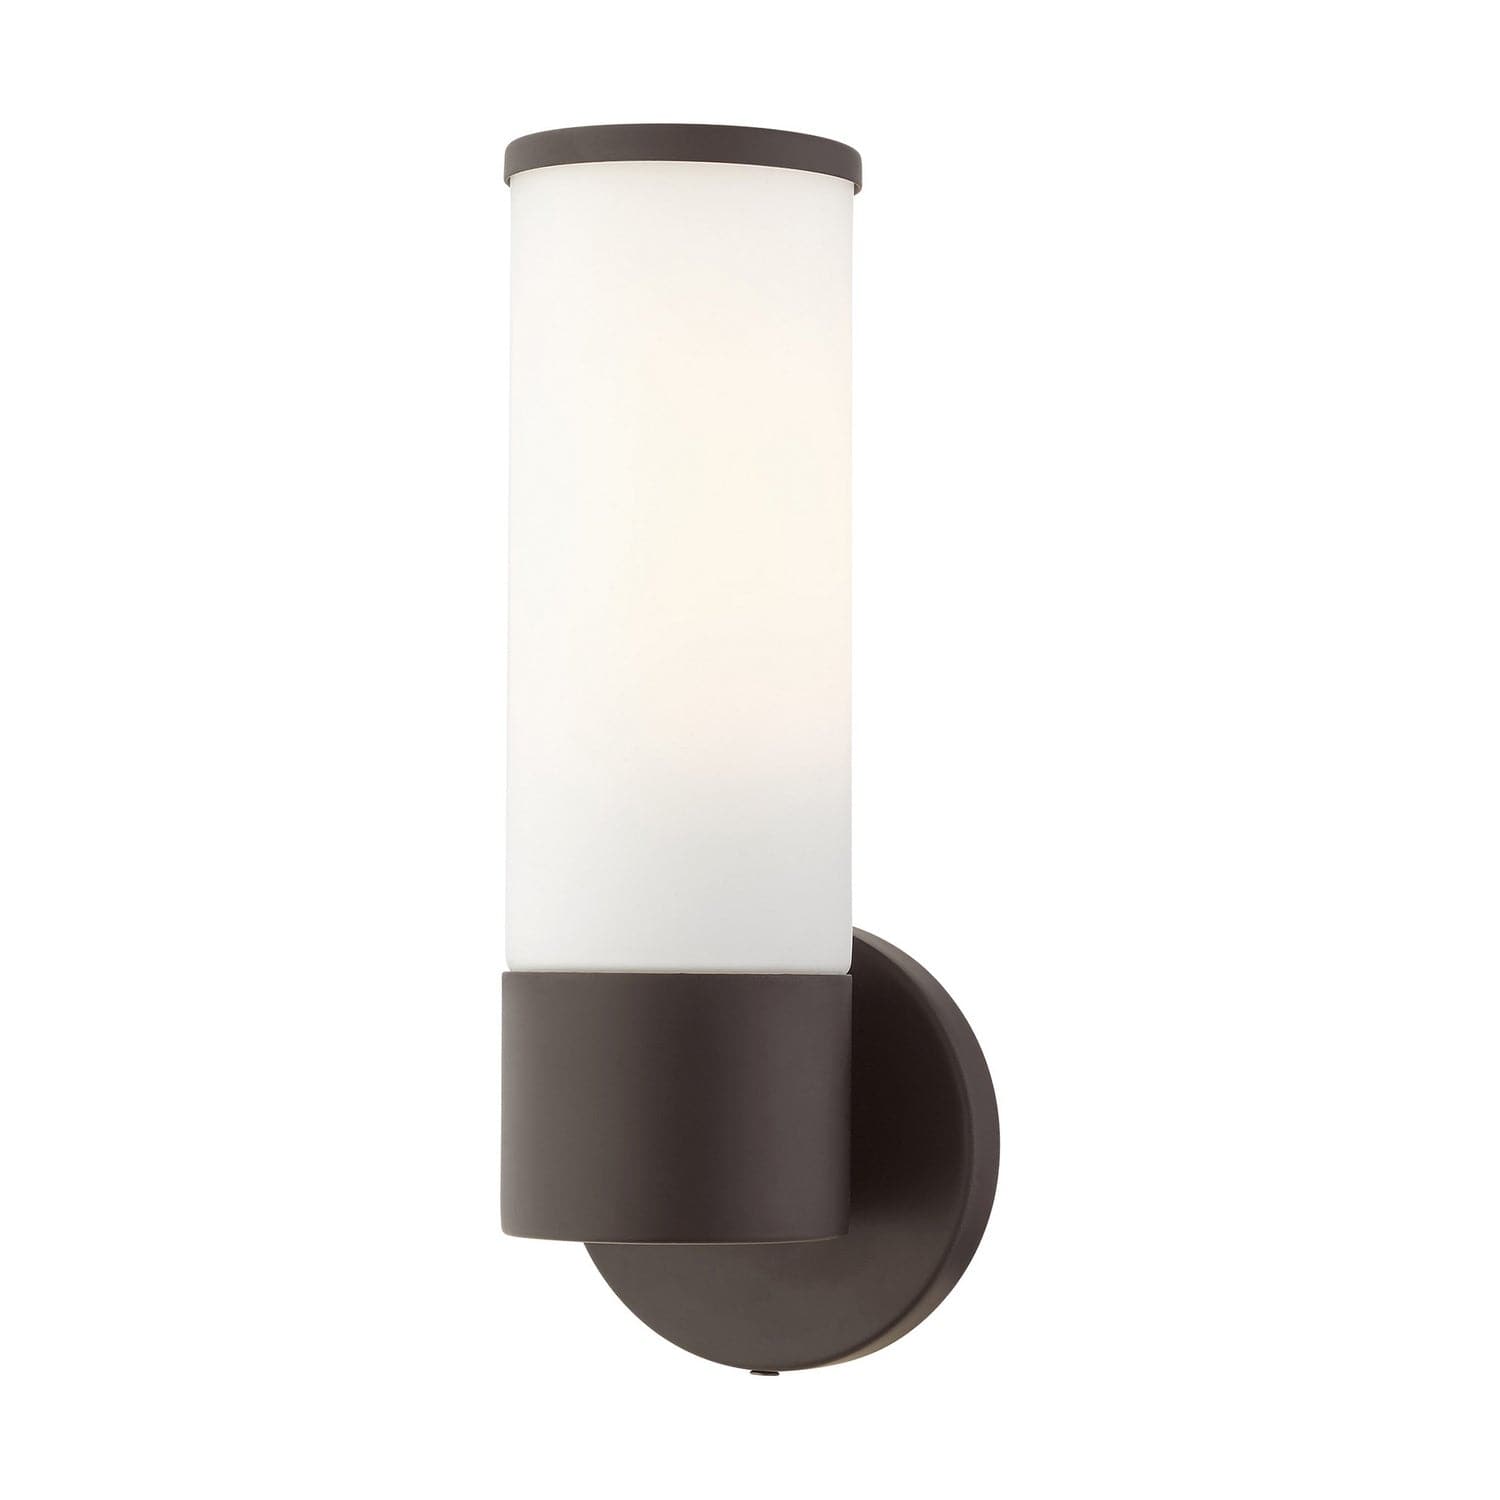 Livex Lighting - 16561-07 - One Light Wall Sconce - Lindale - Bronze